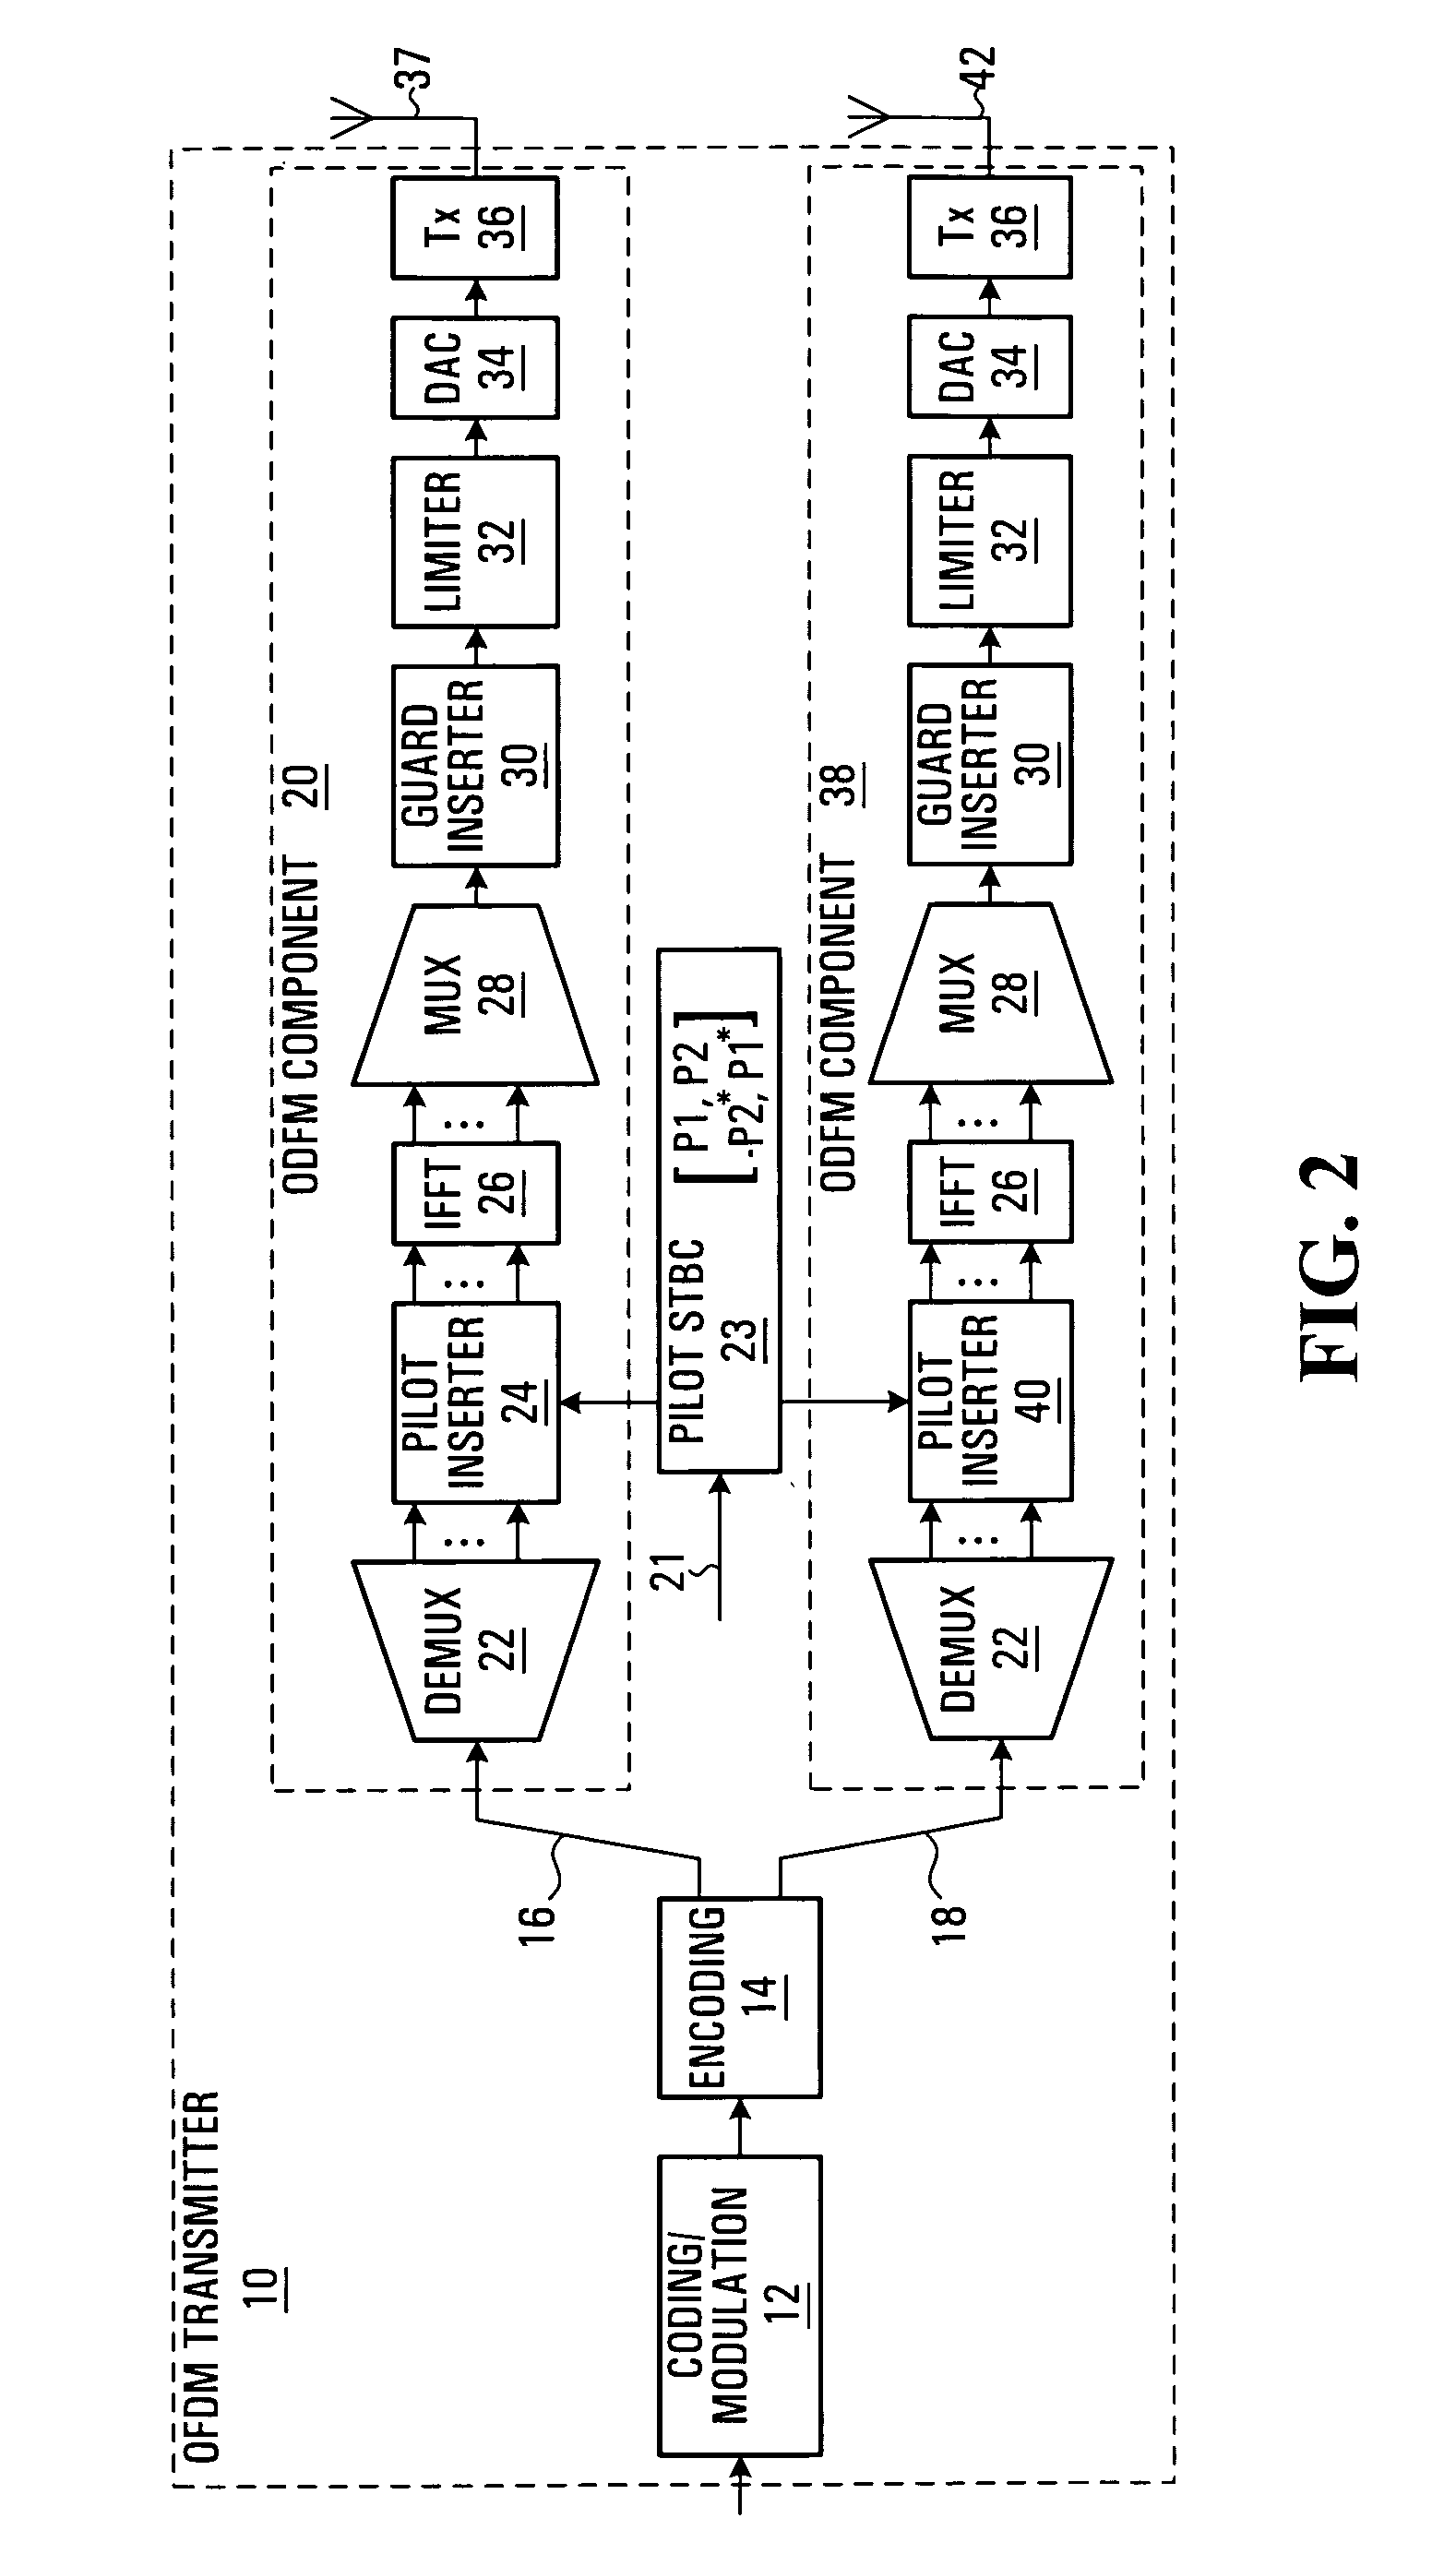 Scattered pilot pattern and channel estimation method for MIMO-OFDM systems